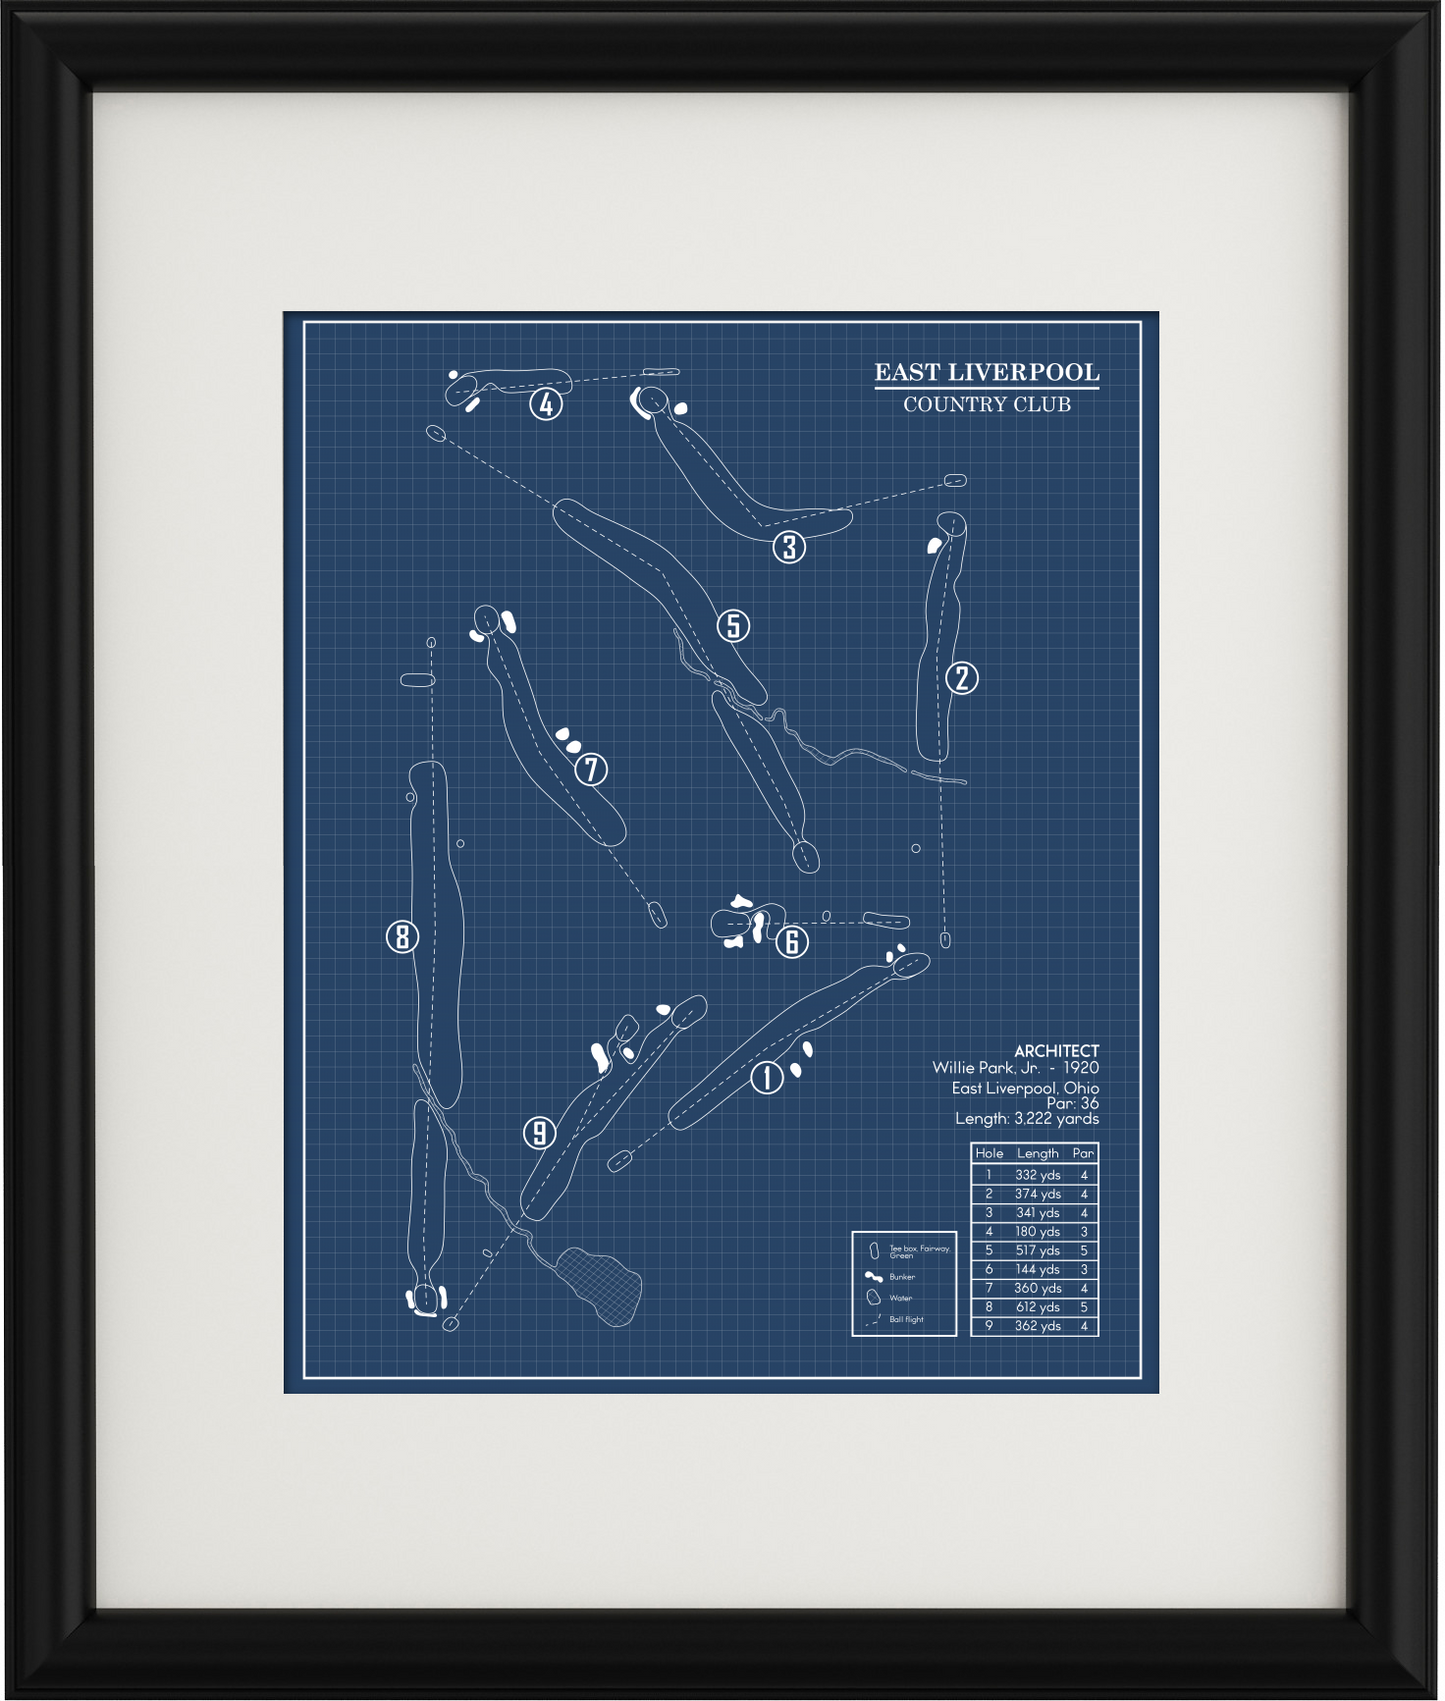 East Liverpool Country Club Blueprint (Print)